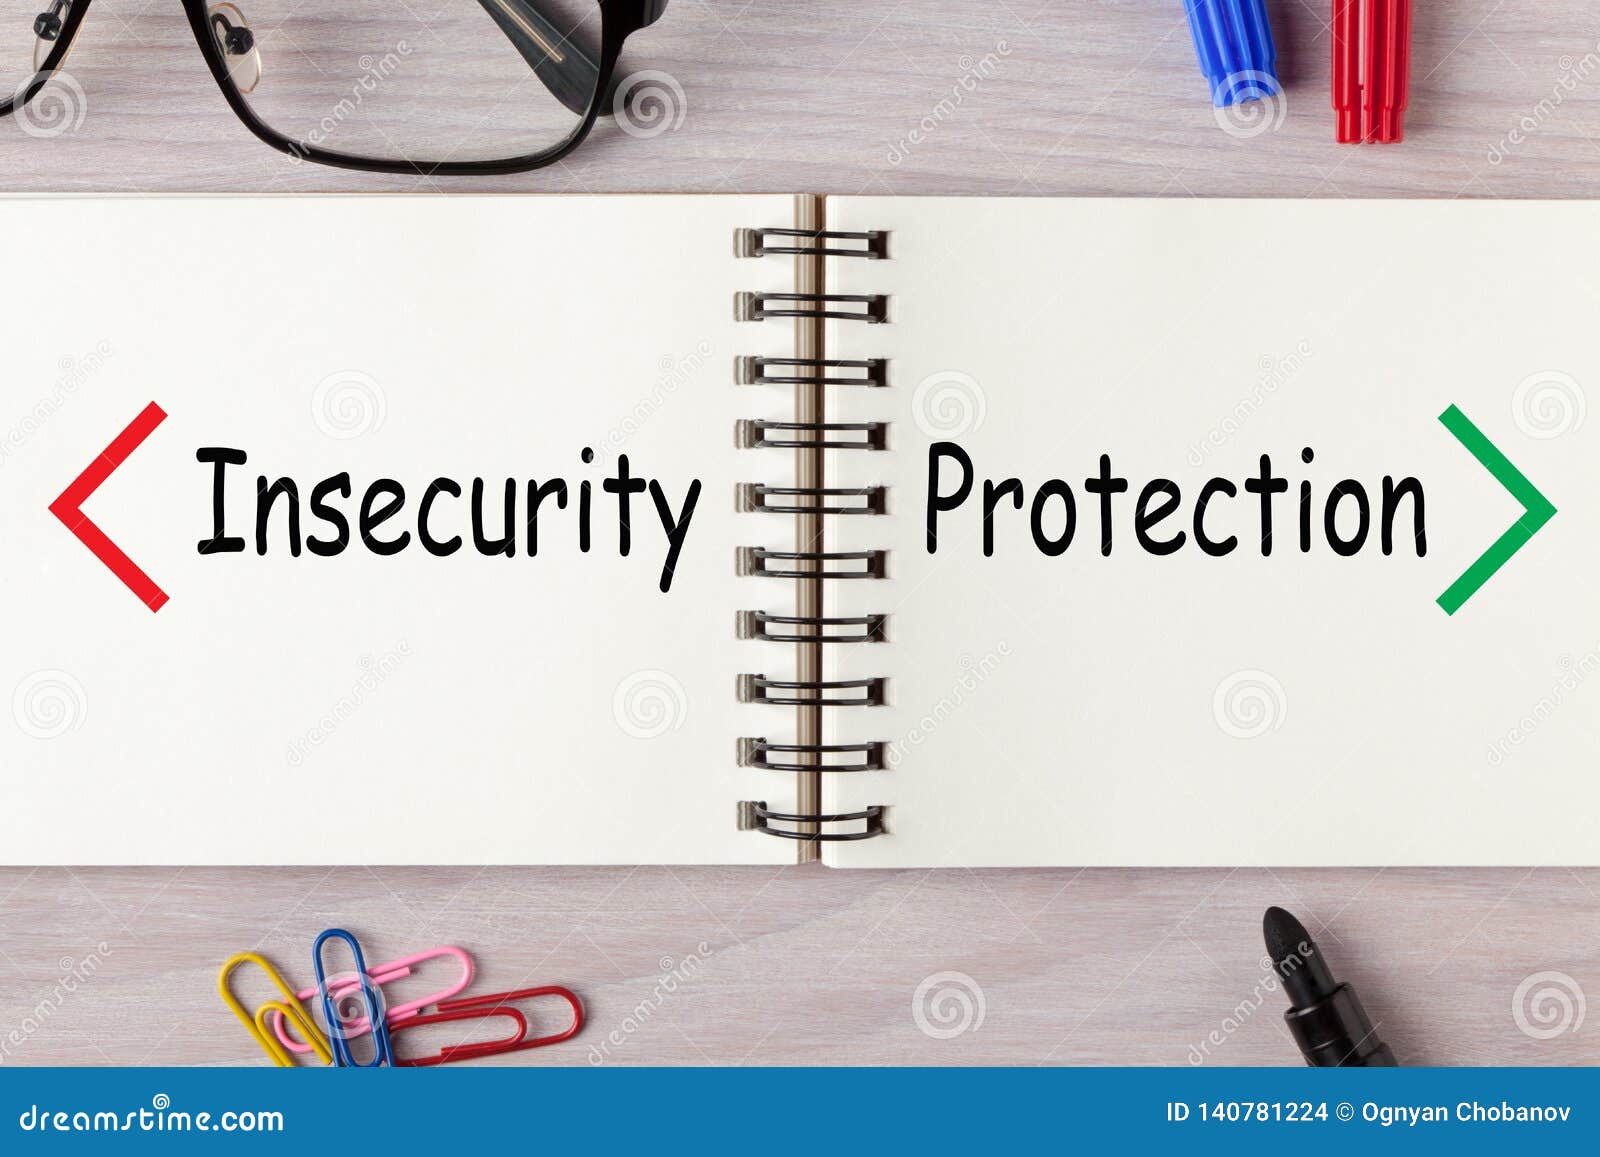 protection insecurity concept